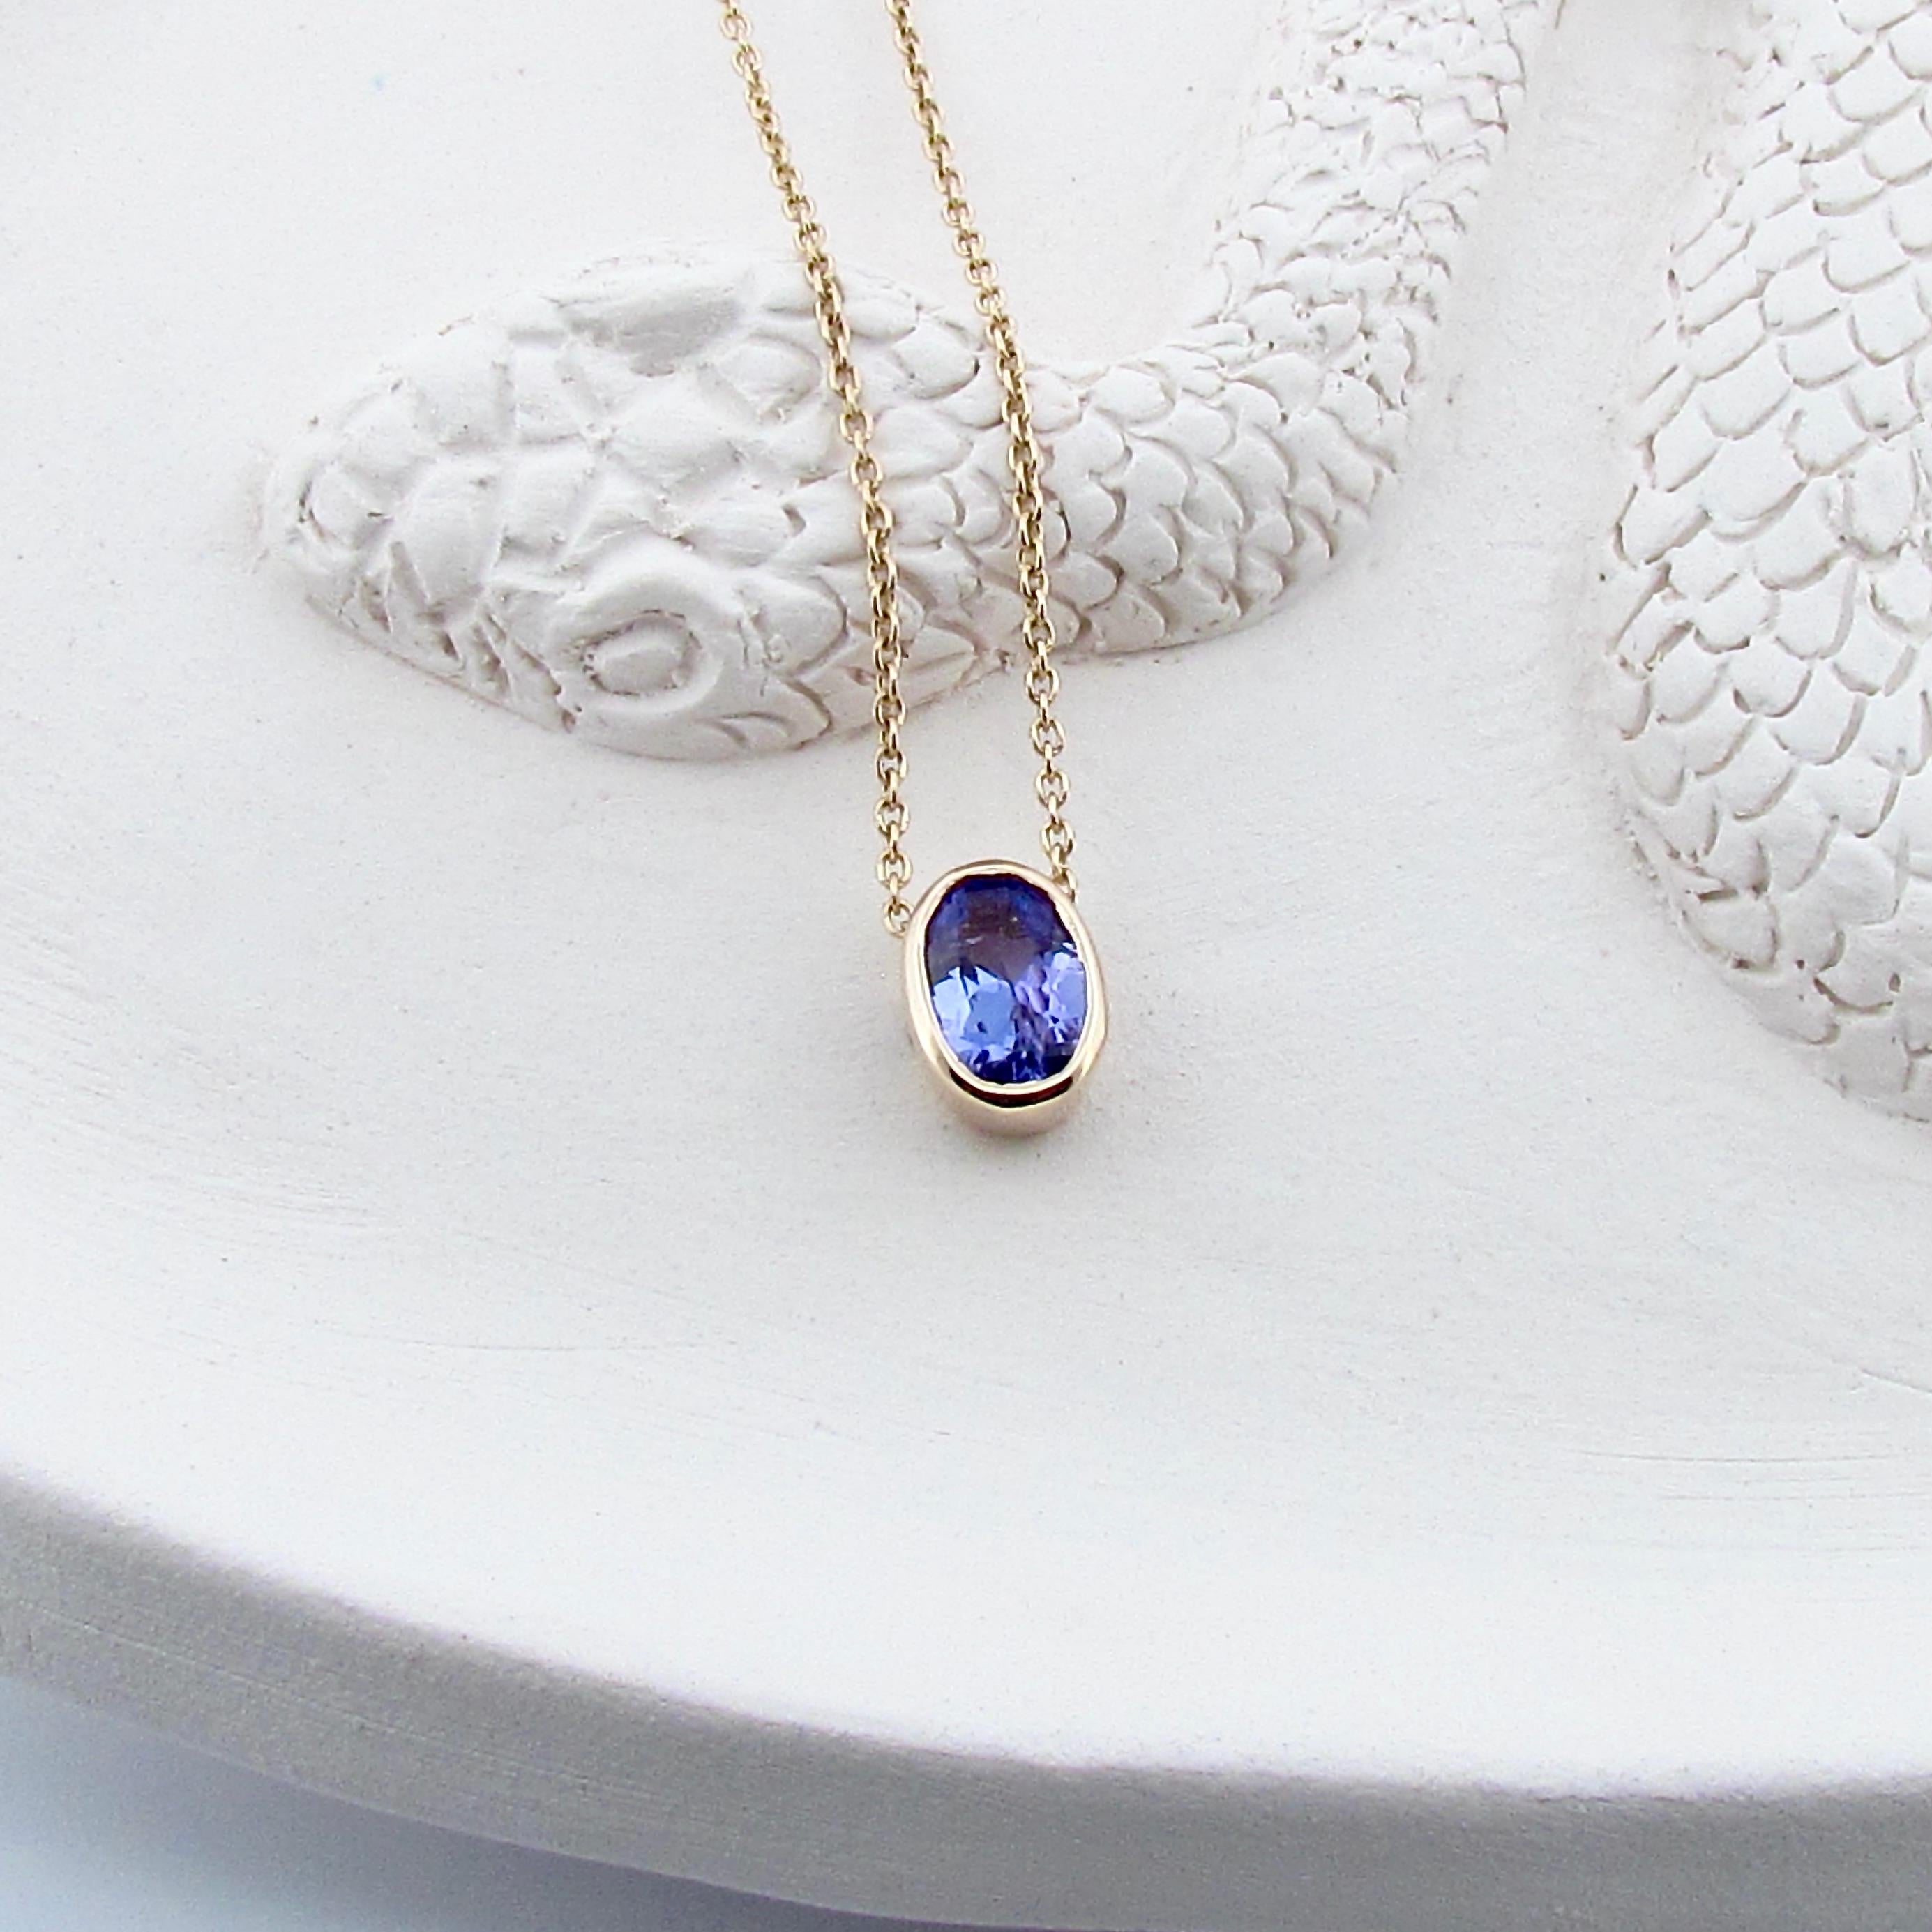 This 9ct solid gold small oval pendant is set with a beautifully faceted bright natural 0.90ct Blue Tanzanite, and comes on a 40cm/16inch 9ct yellow gold cable chain, it is superior in quality and has a nice weight to it. The bright blue hue of the